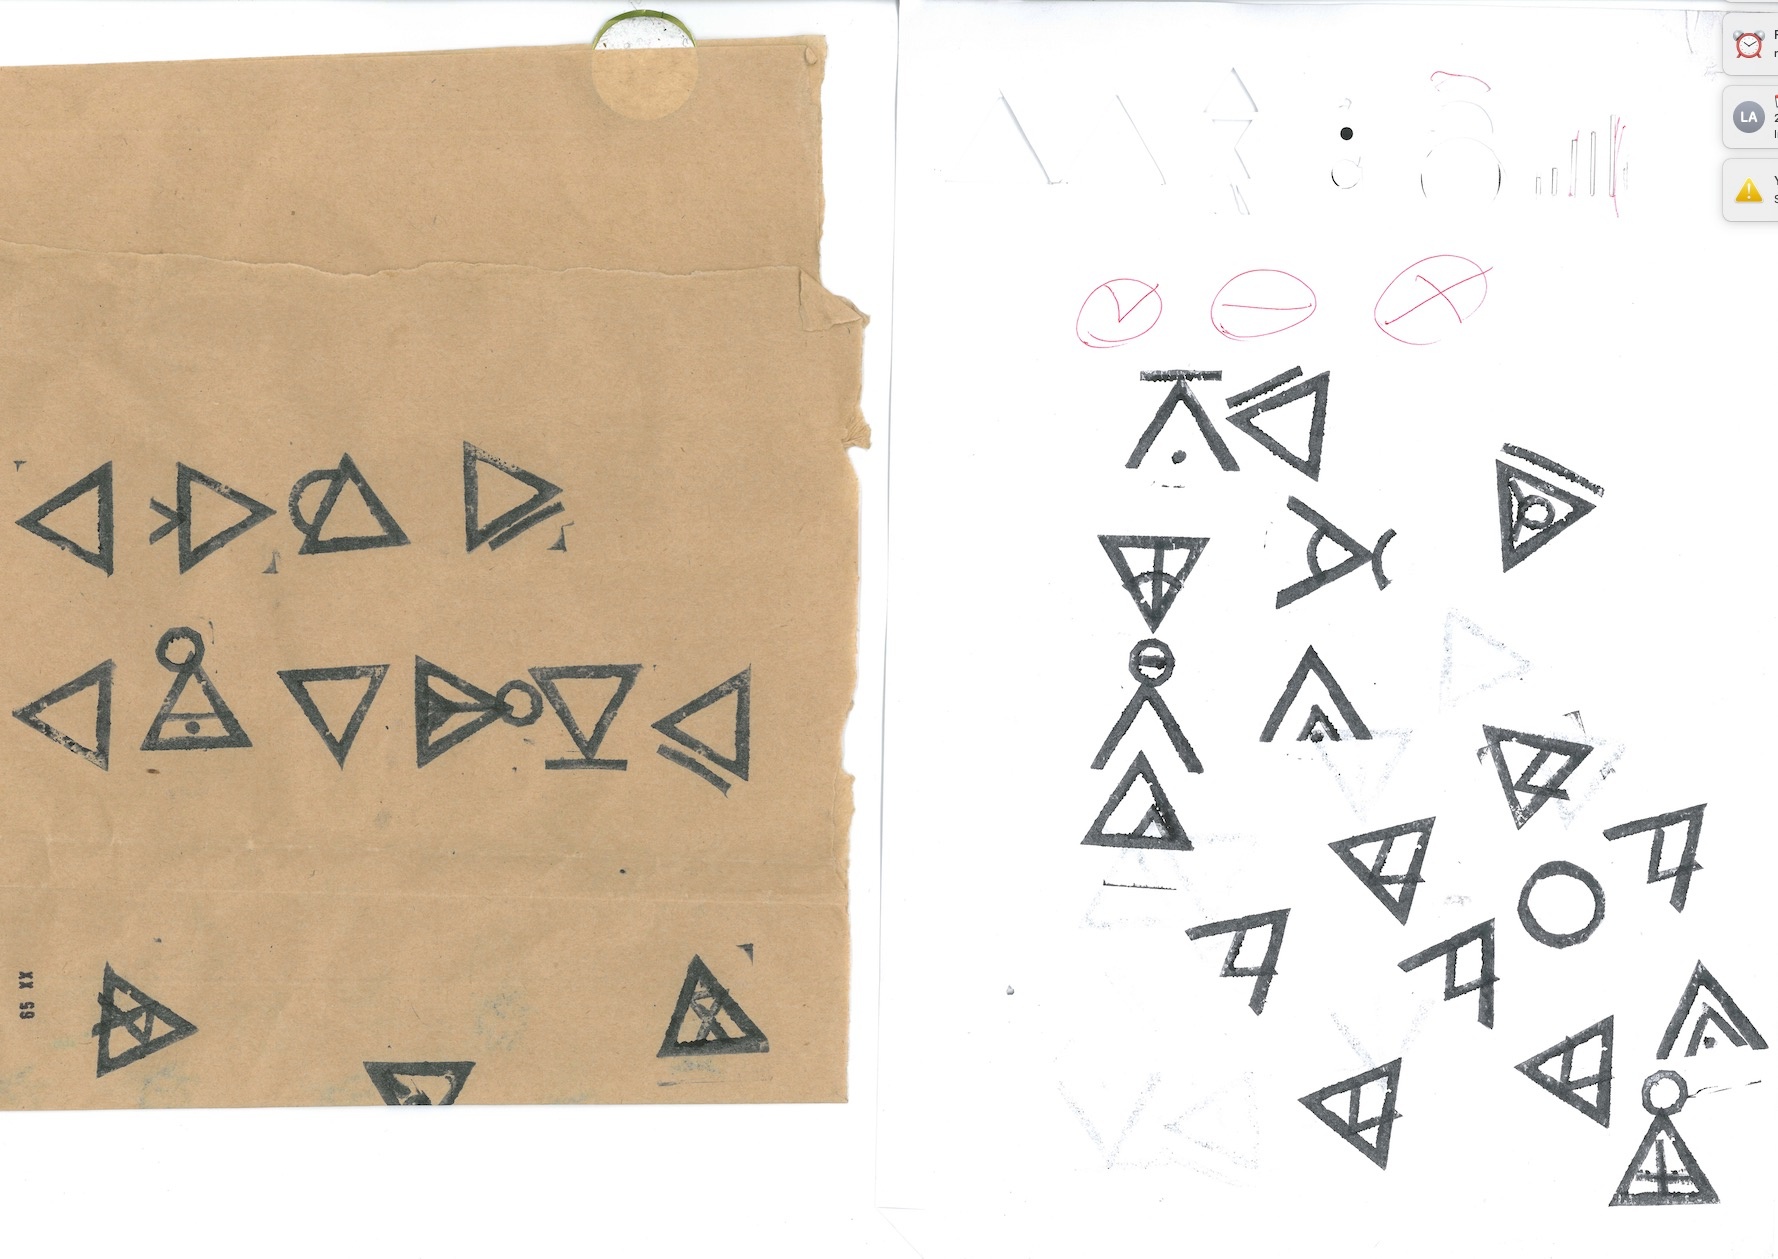 Process image from the offsite development of the online ‘IsiBheqe keyboard’ by linguist Pule kaJanolintji. A digital photograph used as a computer background shows characters from the IsiBheqe script printed on a sheet of brown paper on the left, and a sheet of white paper on the right.
